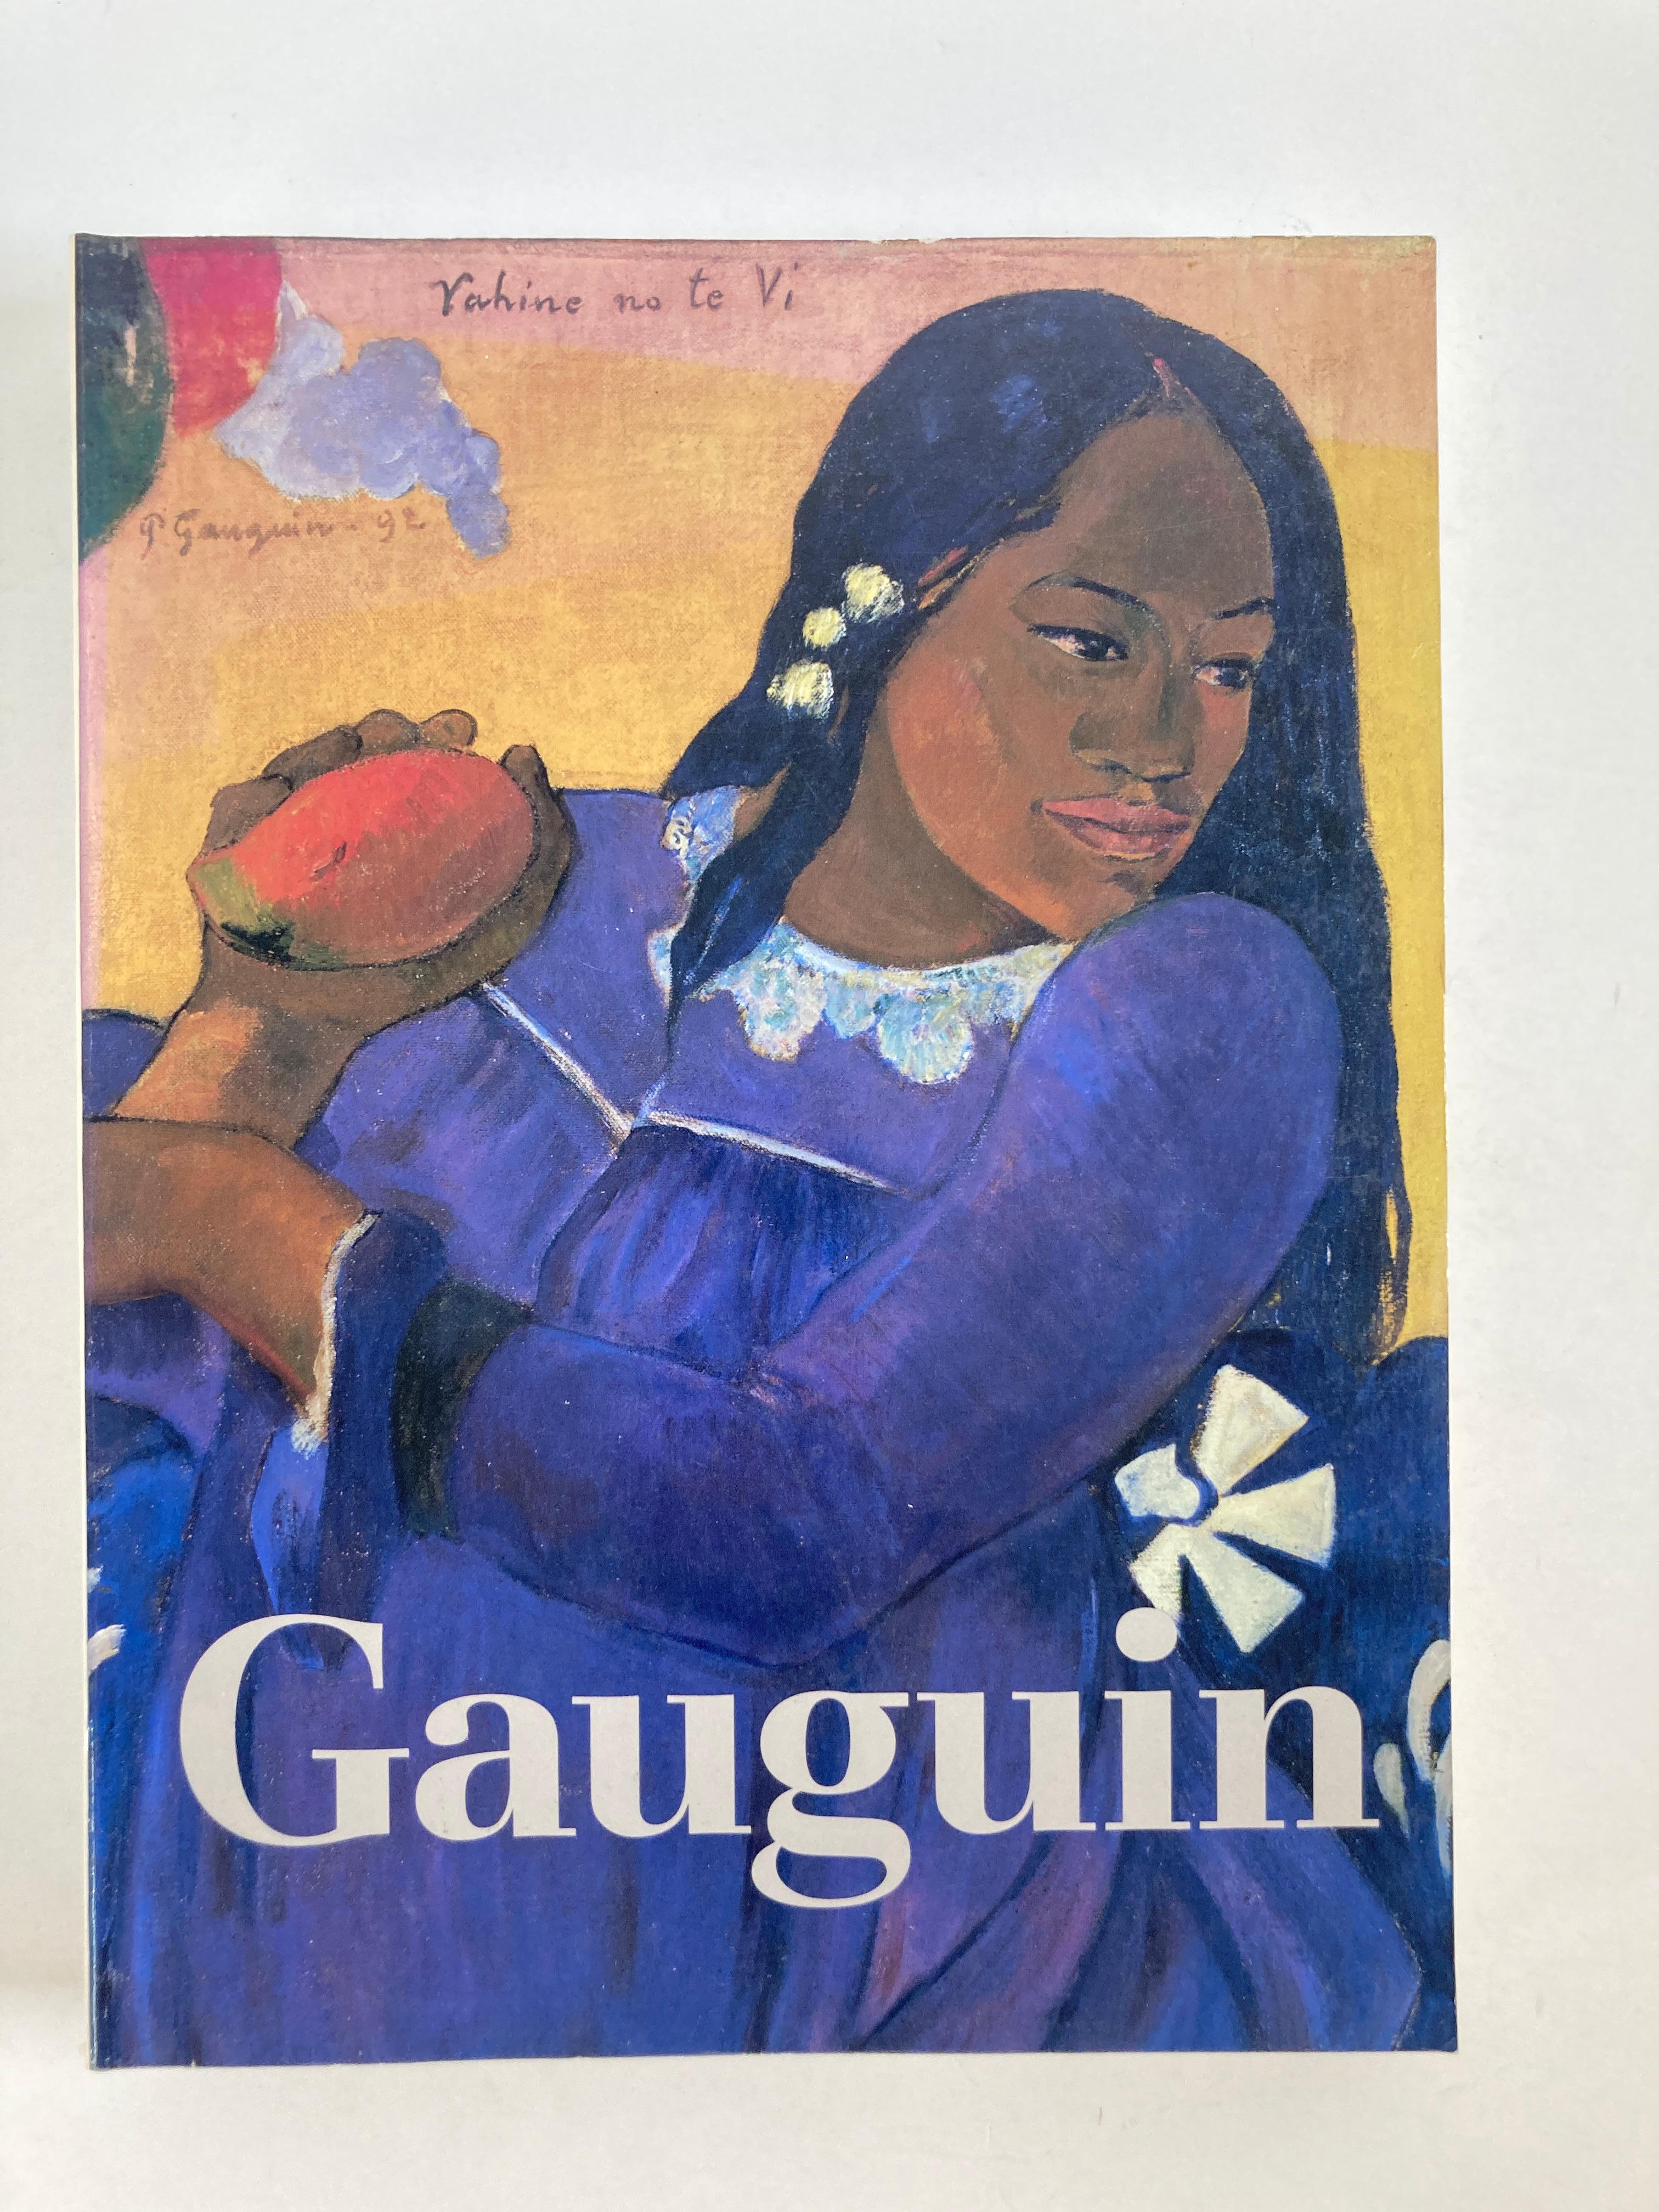 The Art of Paul Gauguin Hardcover – July 1, 1988
by Richard Brettell (Author), Francoise Cachin (Author), Claire Freches-Thory (Author), Charles F. Stuckey (Author)
Publisher: National Gallery of Art
This is the catalogue of the exhibition which